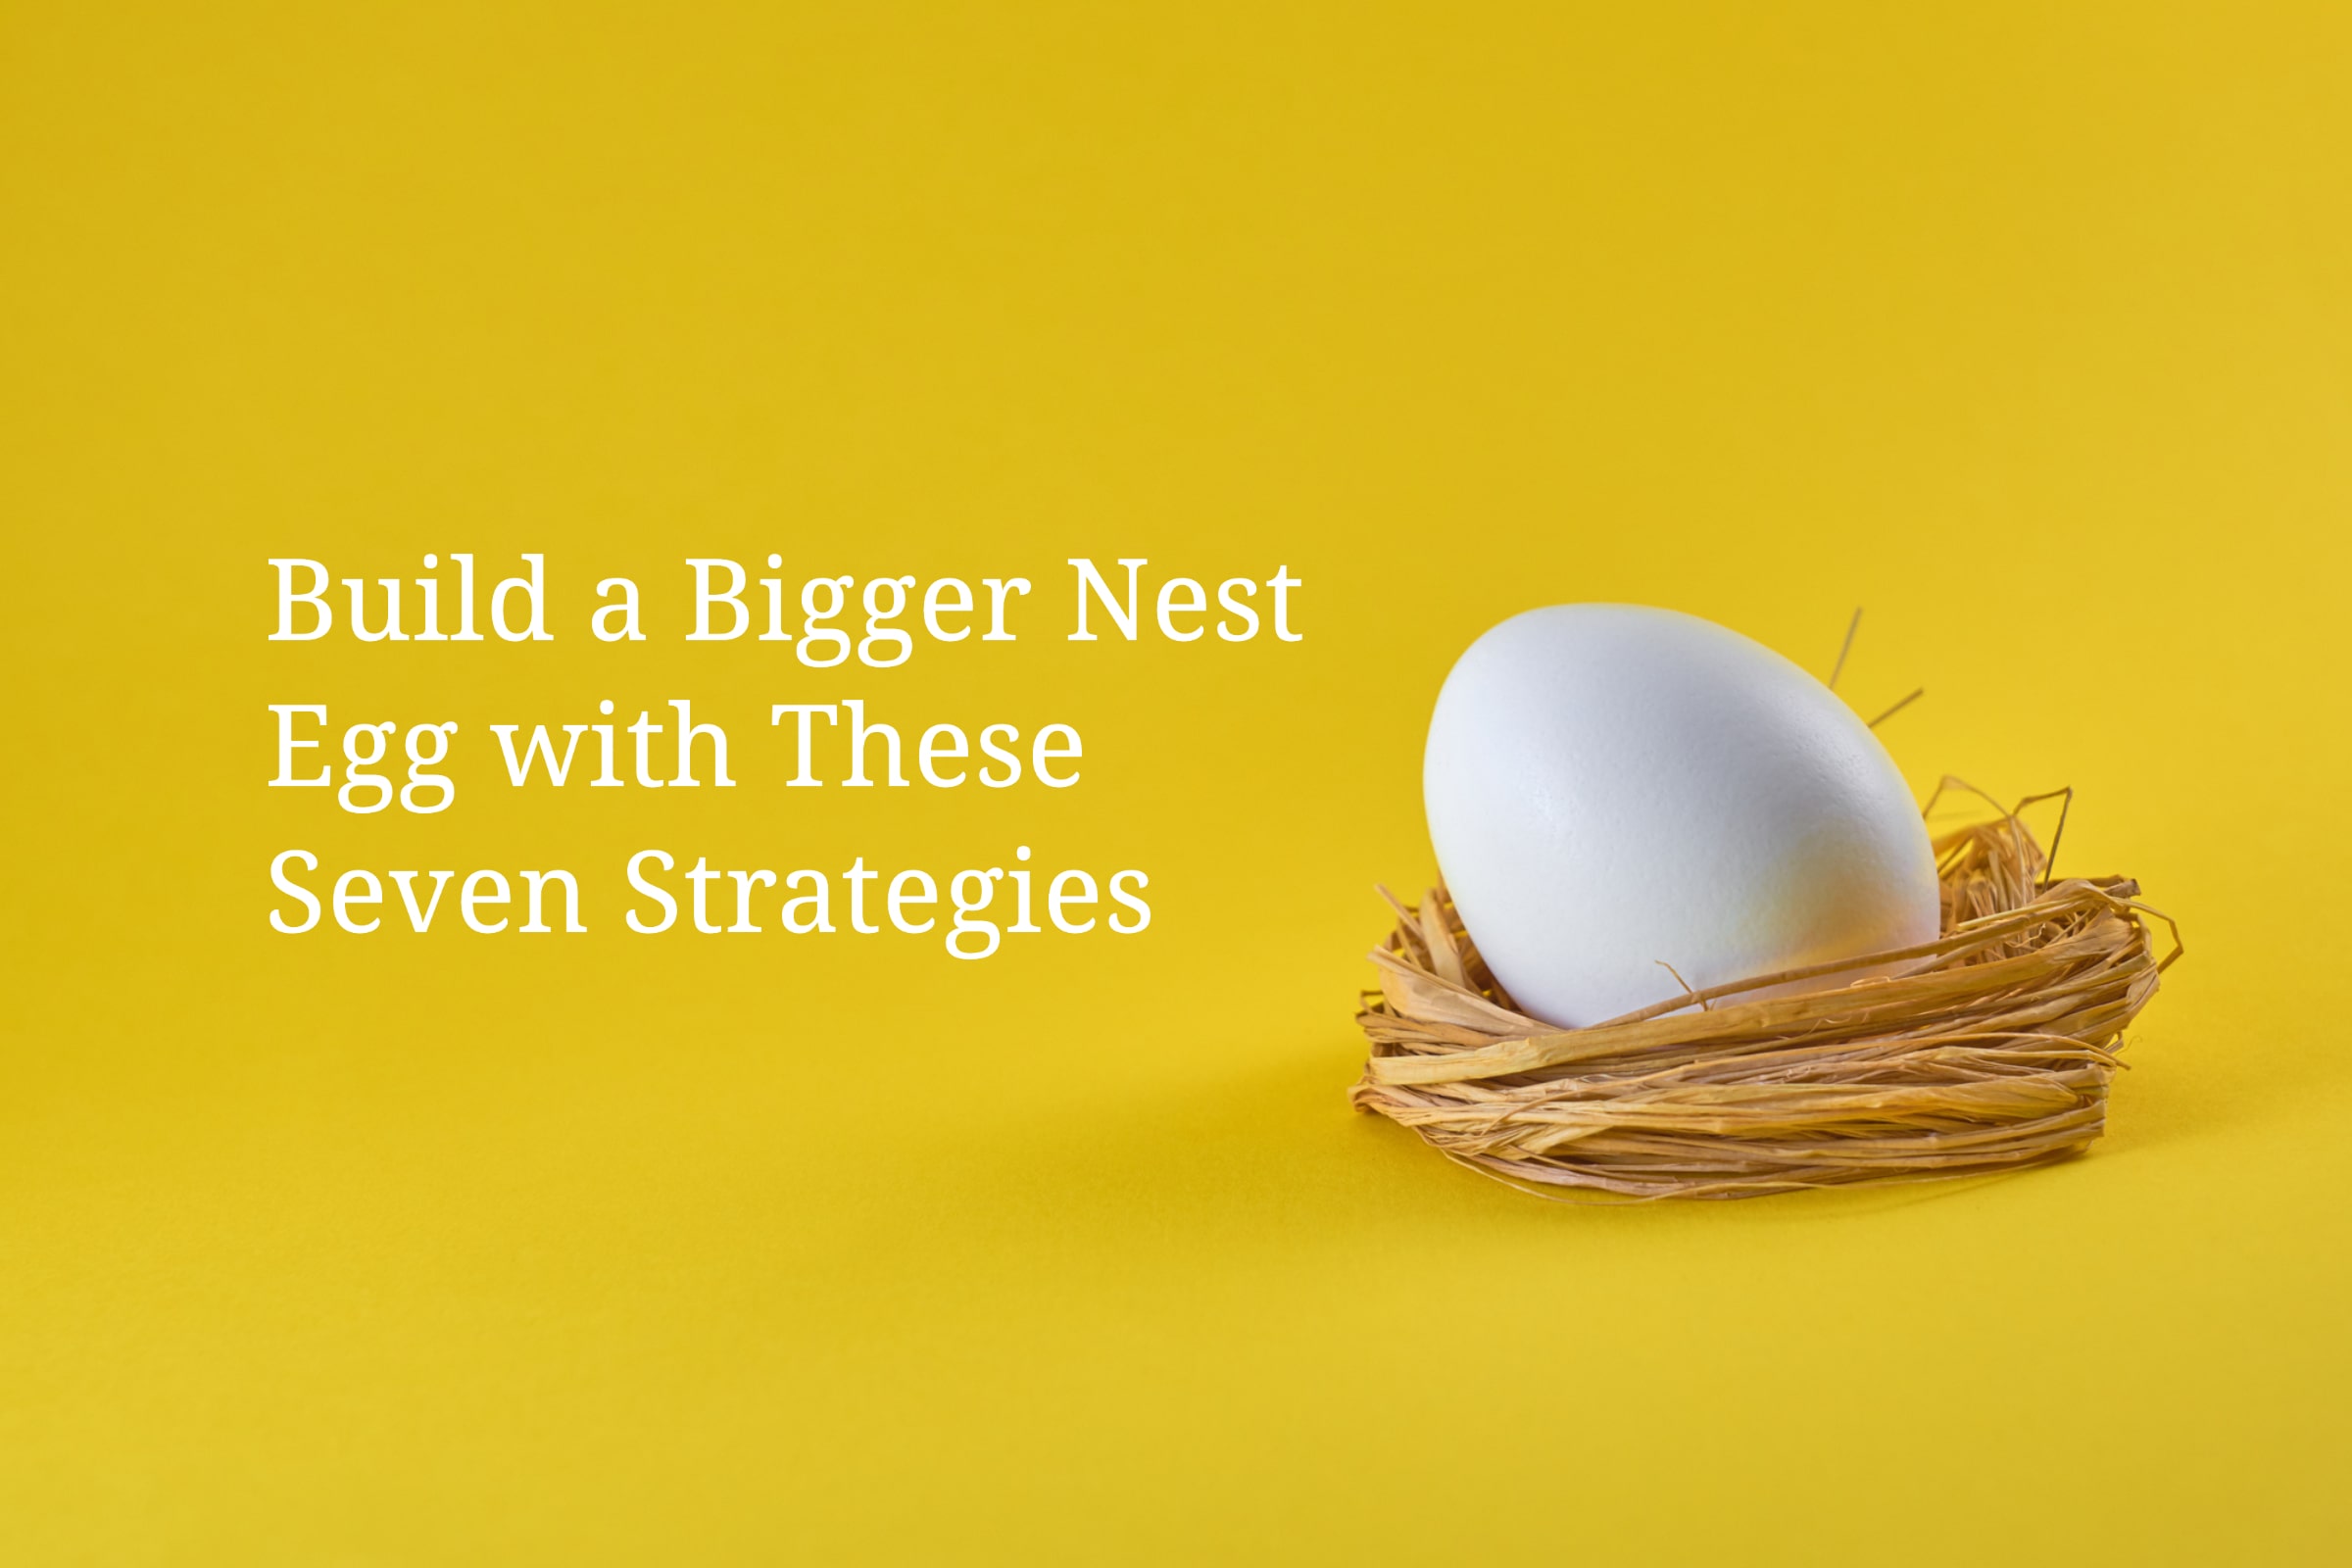 B.A. Schrock Financial Group | Build a Bigger Nest Egg with These 7 Strategies